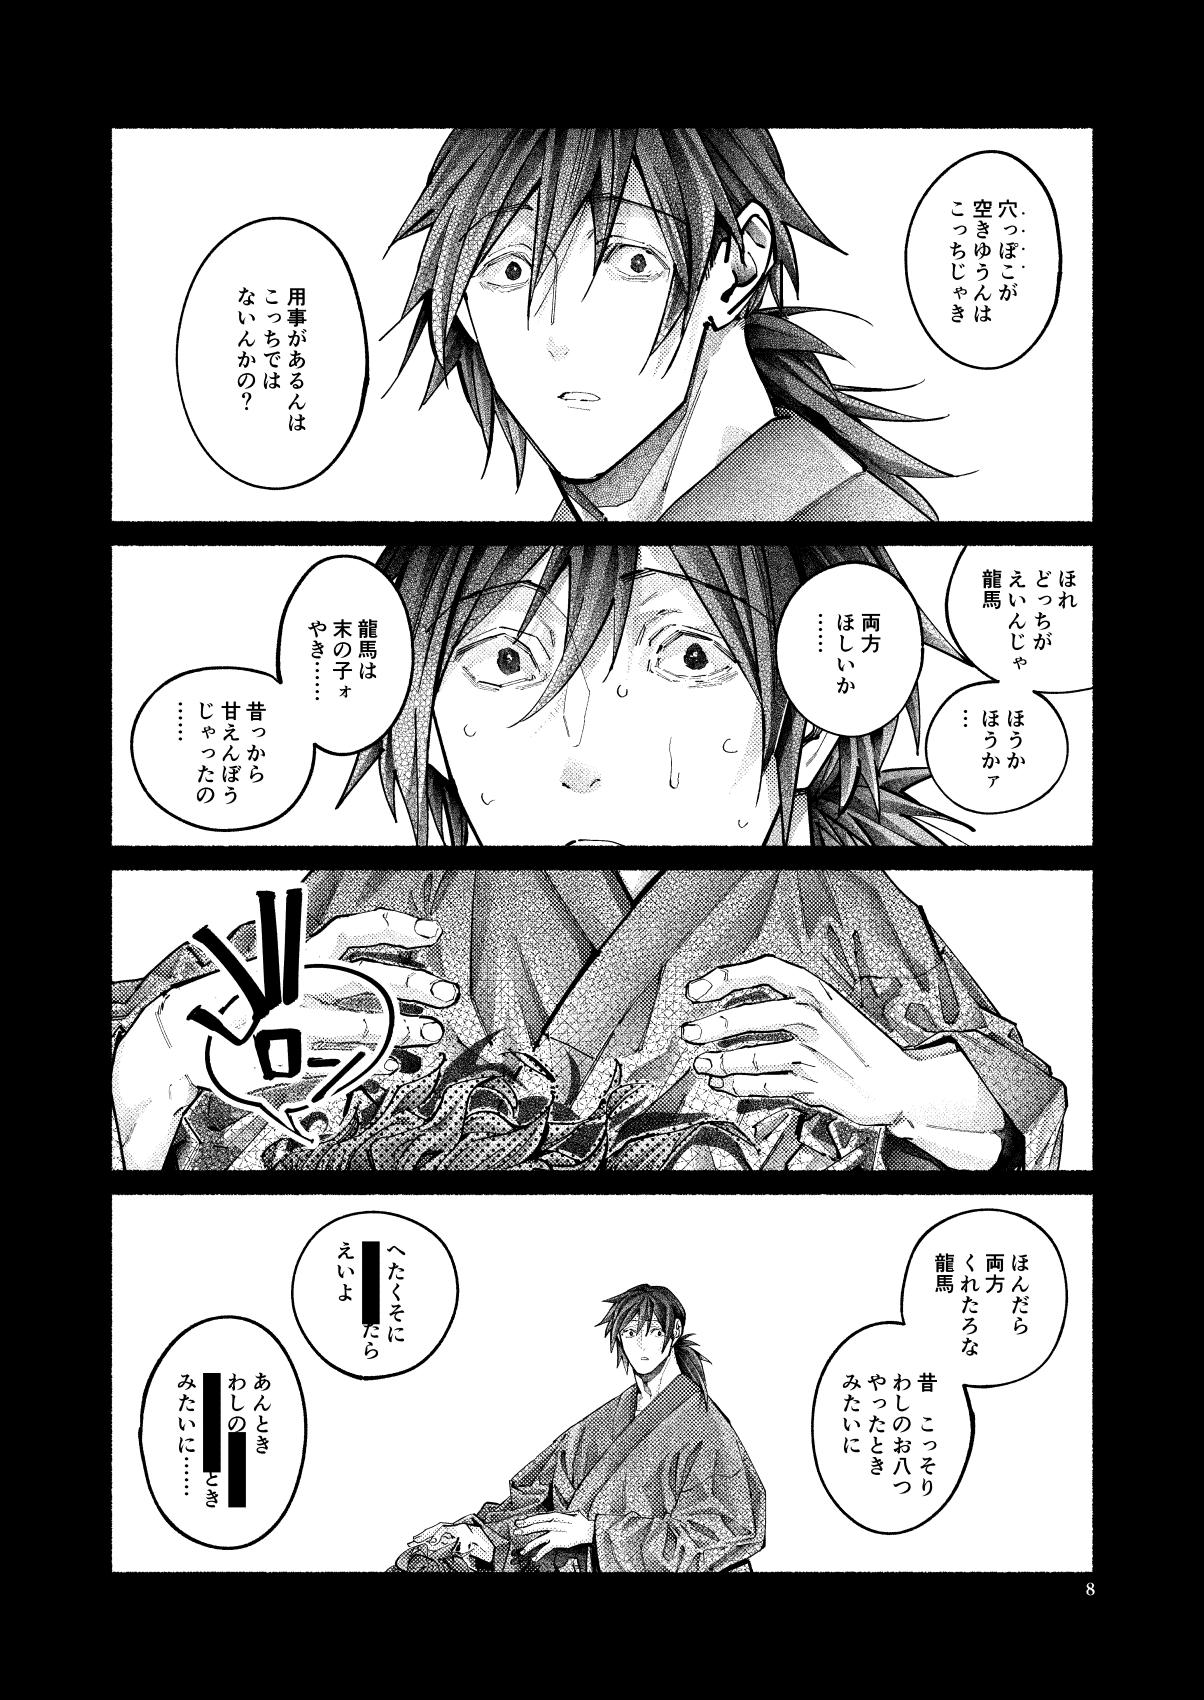 Gaystraight Shazai no Boukun - Fate grand order Free Amateur - Page 8